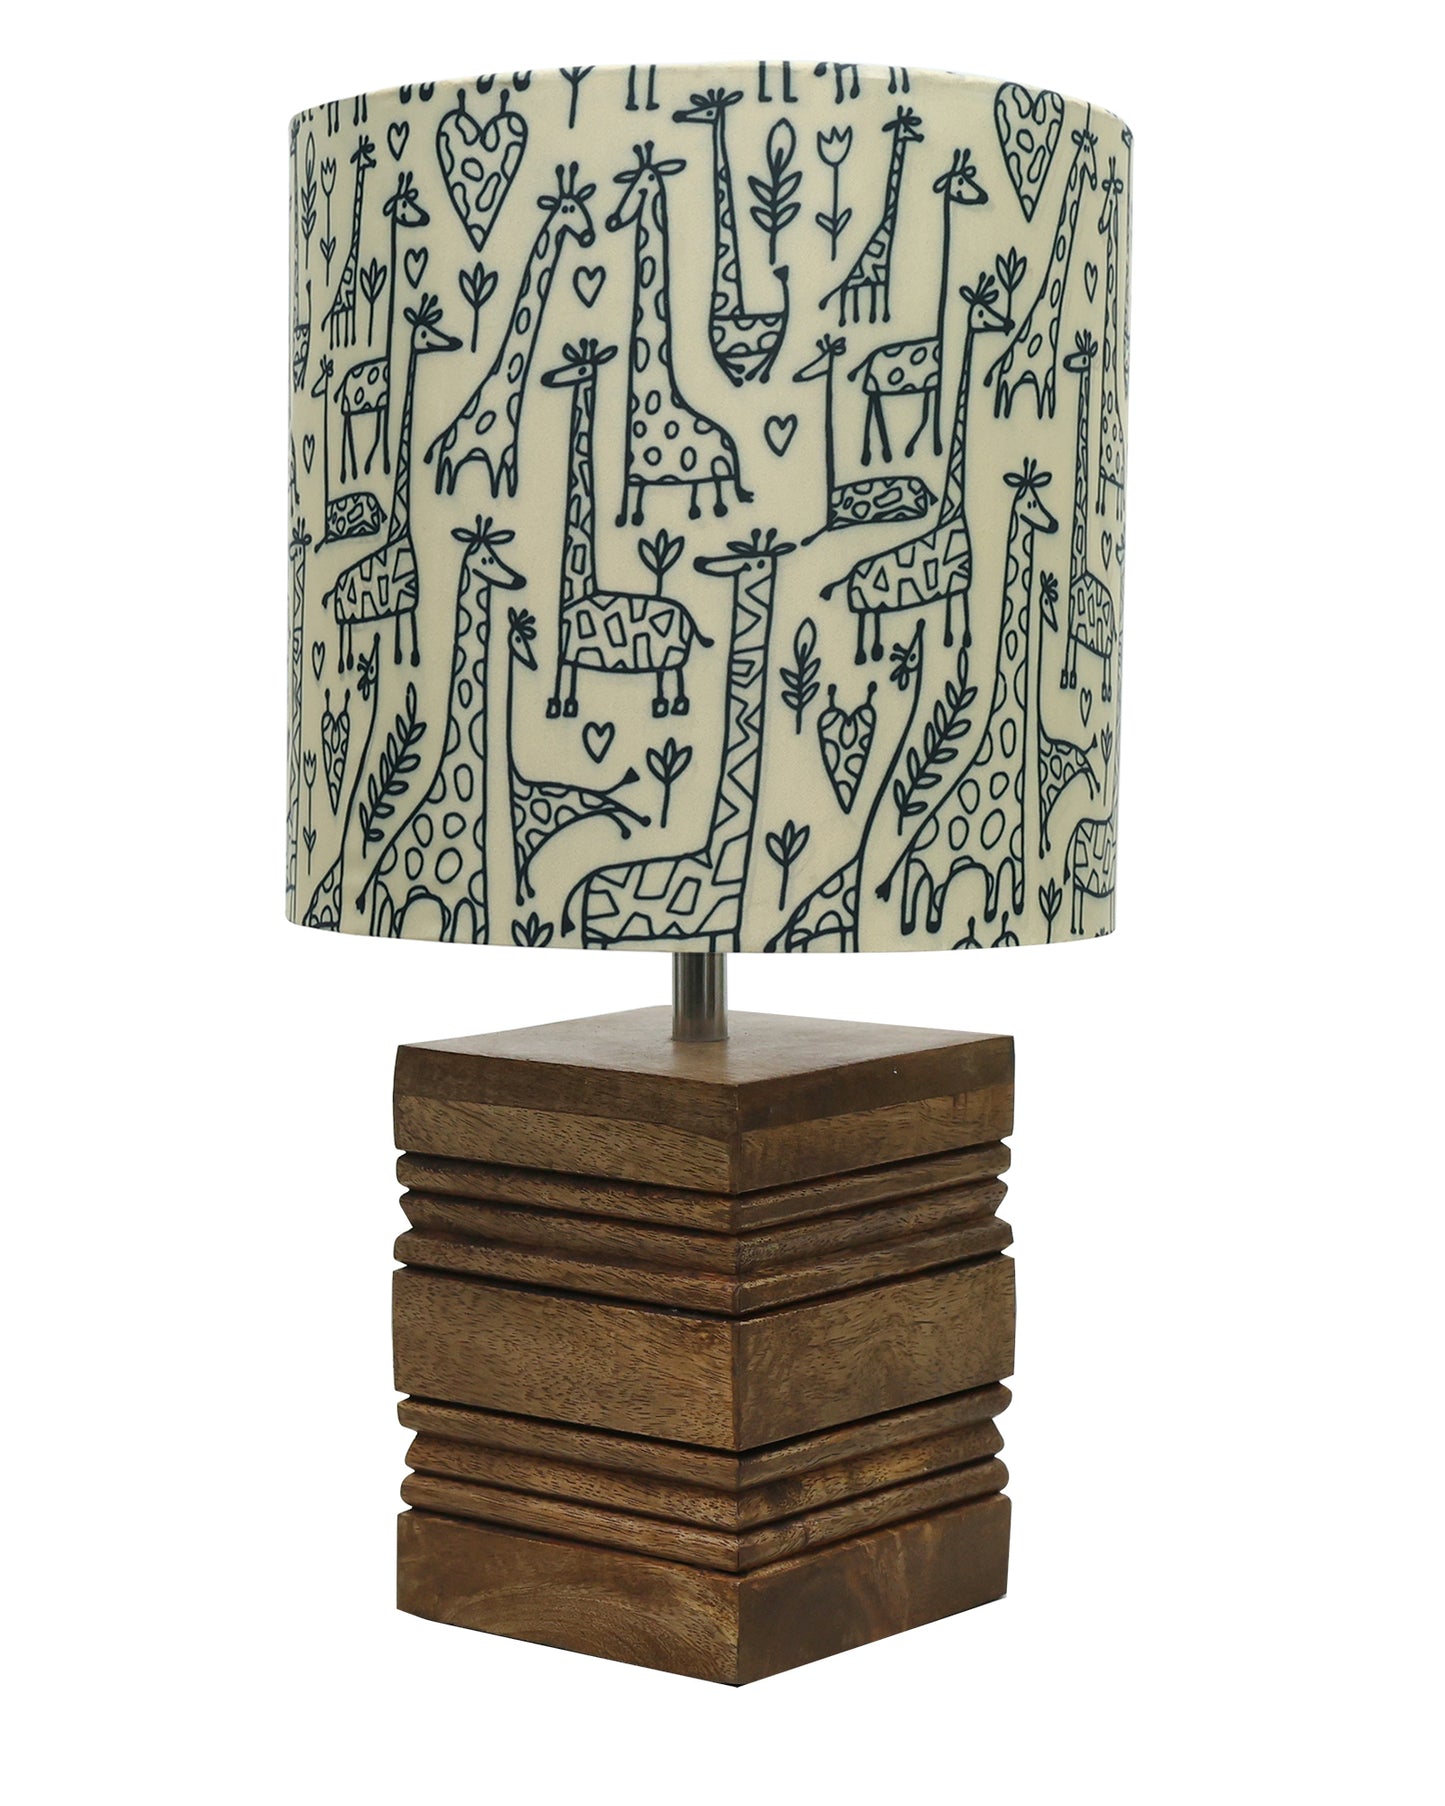 Wood Table Lamp, Modern Base Fabric Lampshade for Home Office Cafe Restaurant, Rib Cube